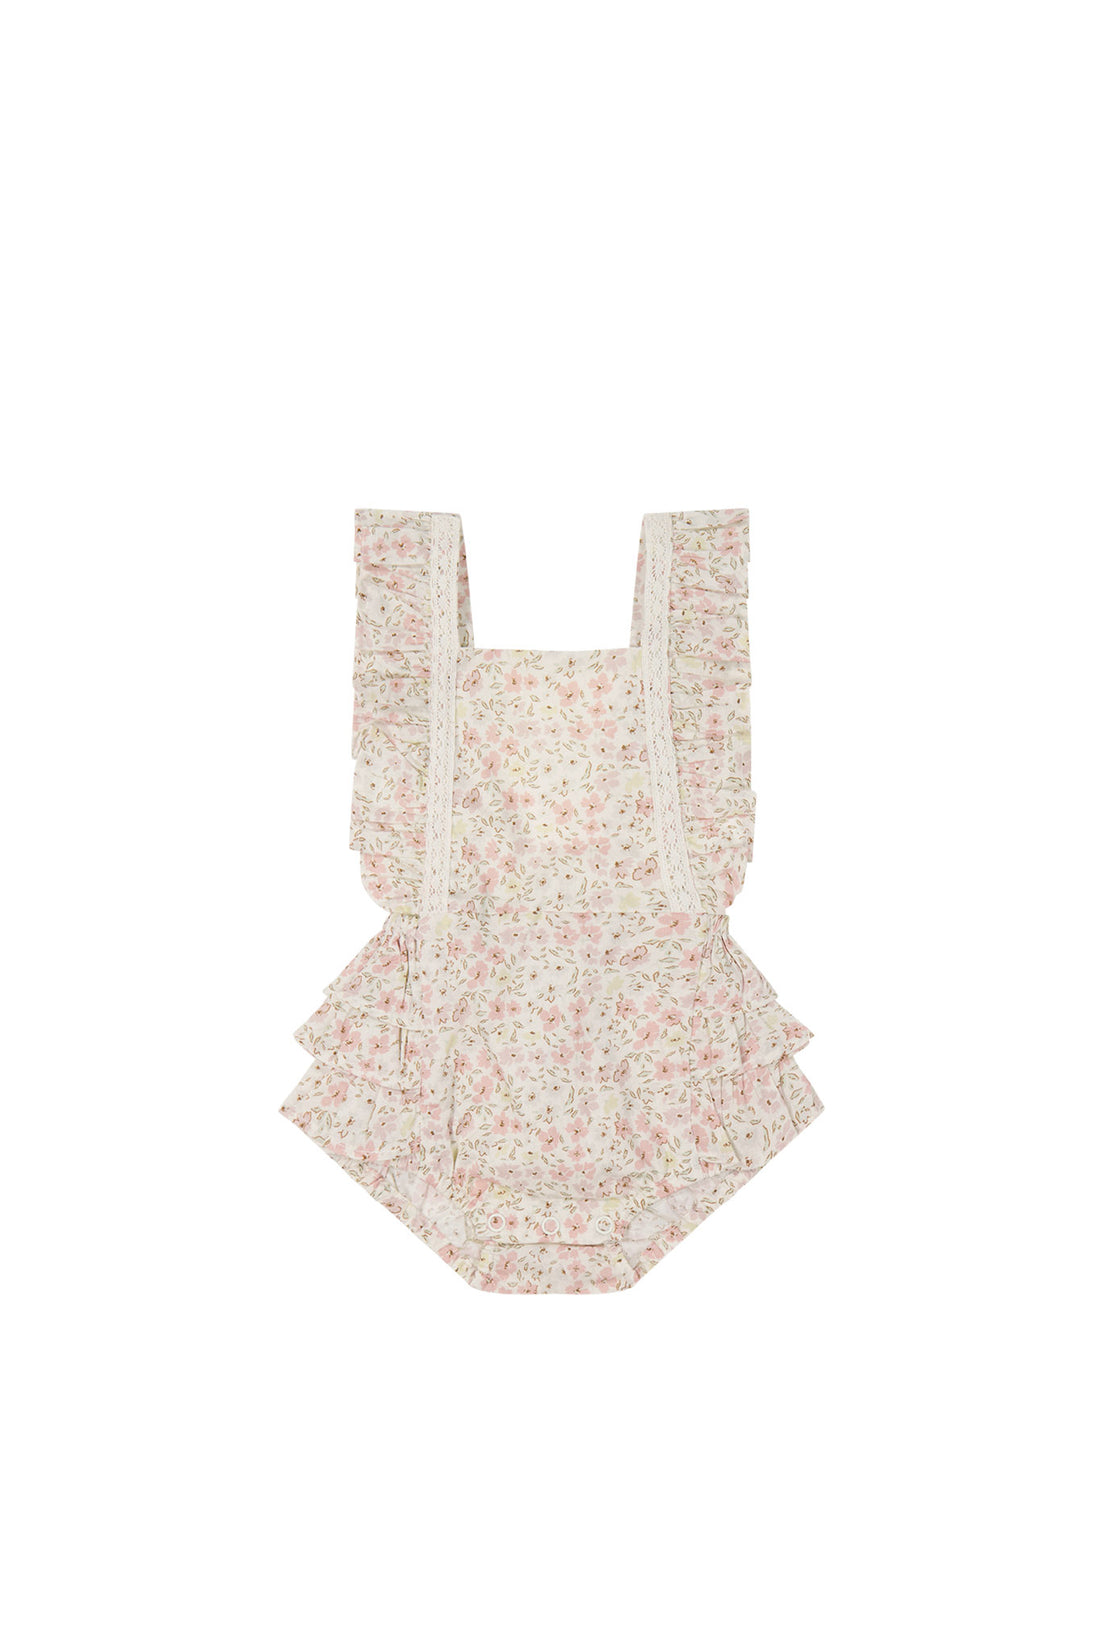 Organic Cotton Heidi Playsuit - Fifi Floral Childrens Playsuit from Jamie Kay NZ